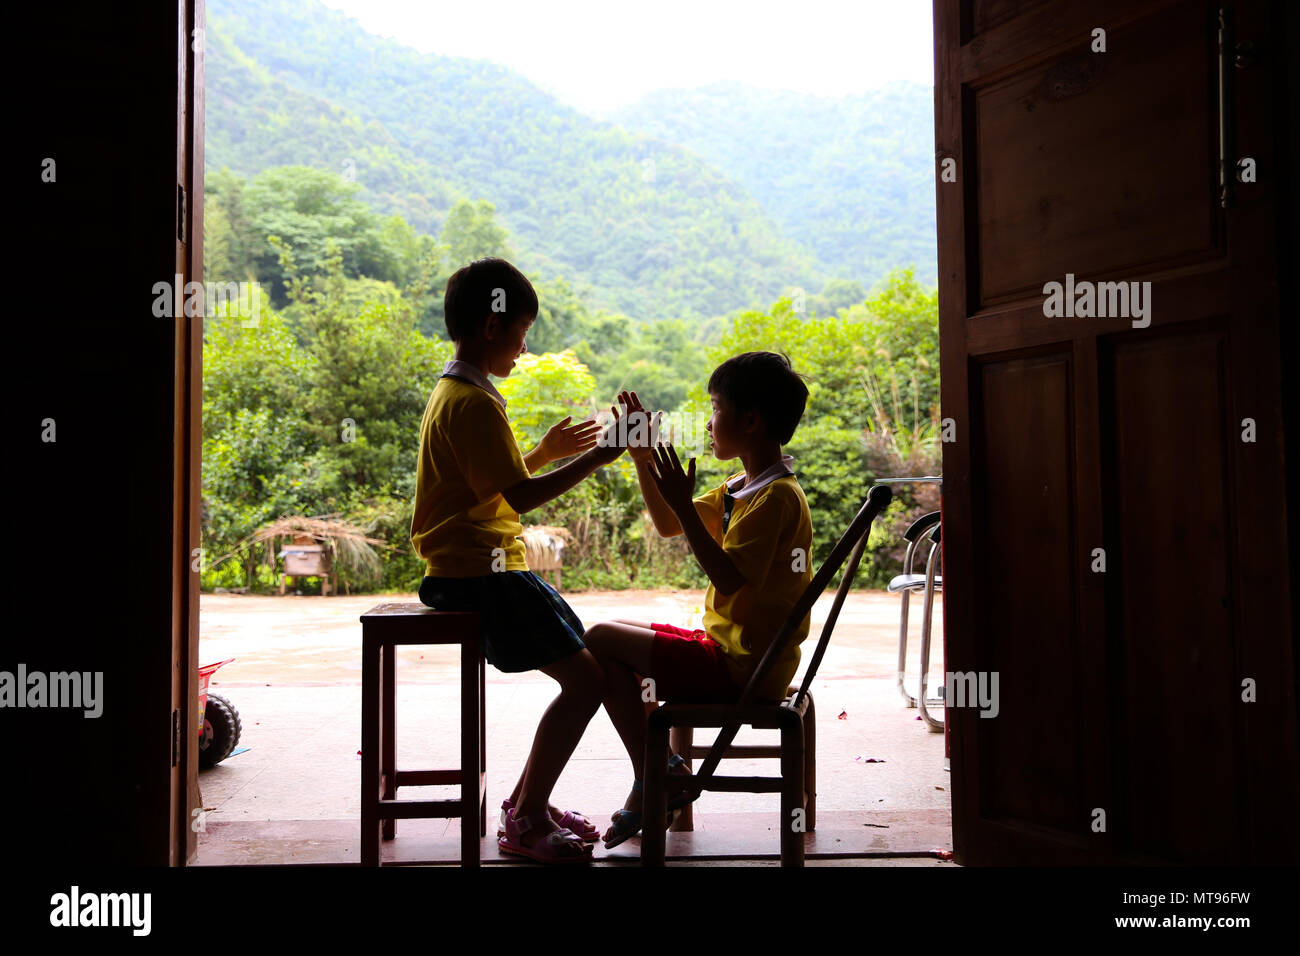 Nanchang, China's Jiangxi Province. 23rd May, 2018. Nine-year-old Zhang Xianghua (L) plays with her twin sister Zhang Xianglan in Suolong Village of Yudu County, east China's Jiangxi Province, May 23, 2018. With about 1,000 residents, Suolong Village has 29 cases of multiple births, a high rate considering the modest population size. Credit: Pan Siwei/Xinhua/Alamy Live News Stock Photo